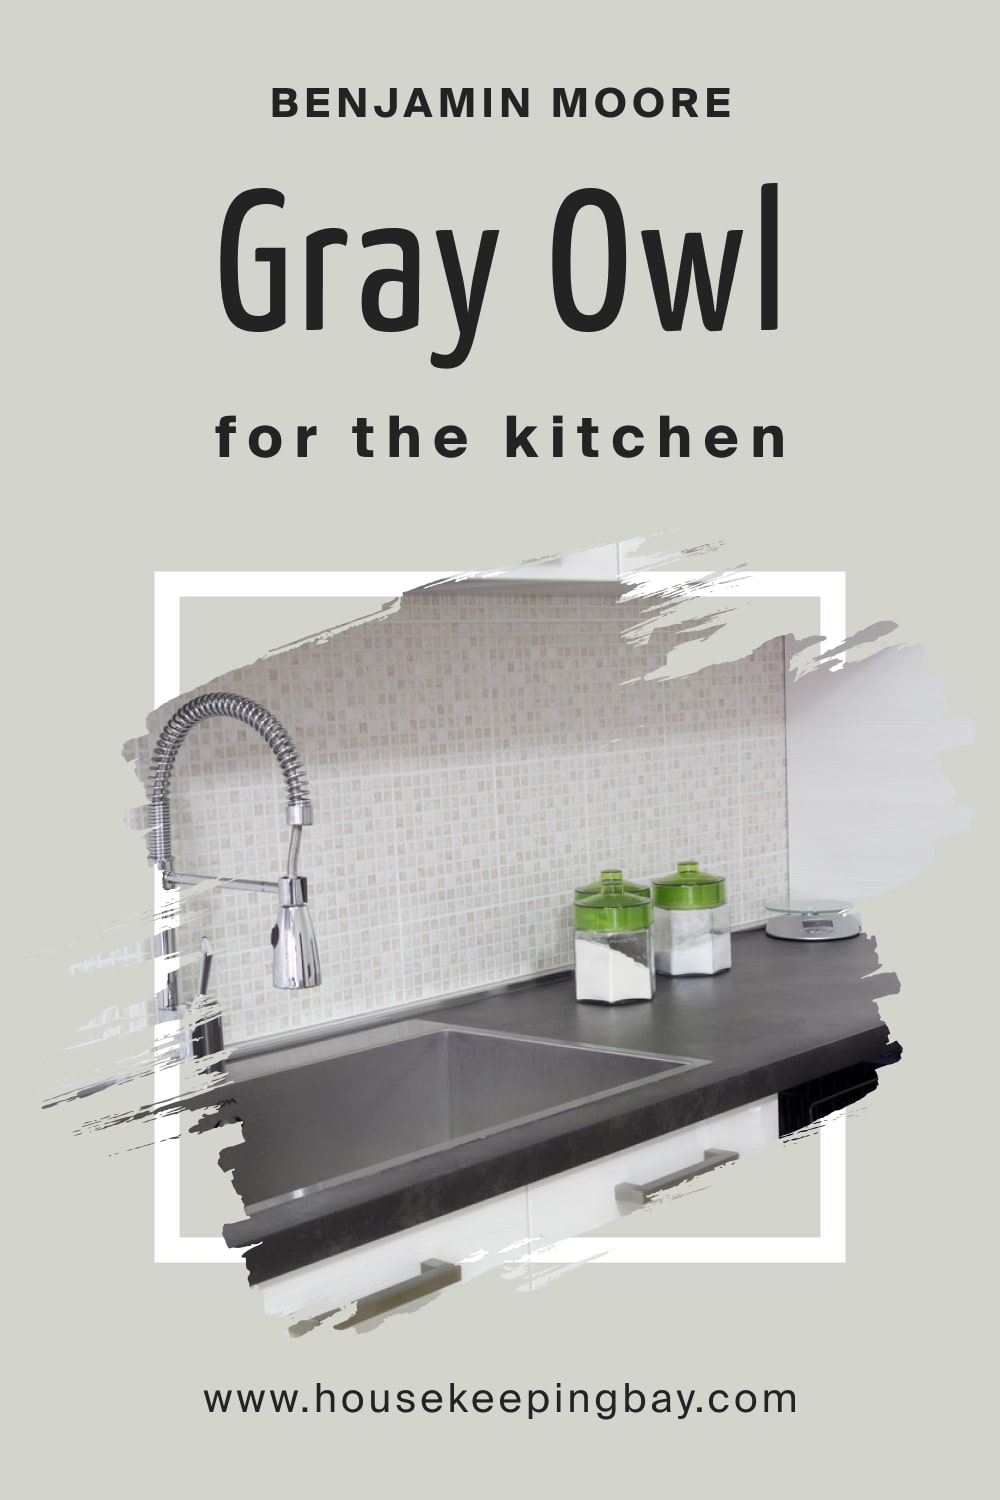 Benjamin Moore. Gray Owl 2137 60 for the Kitchen